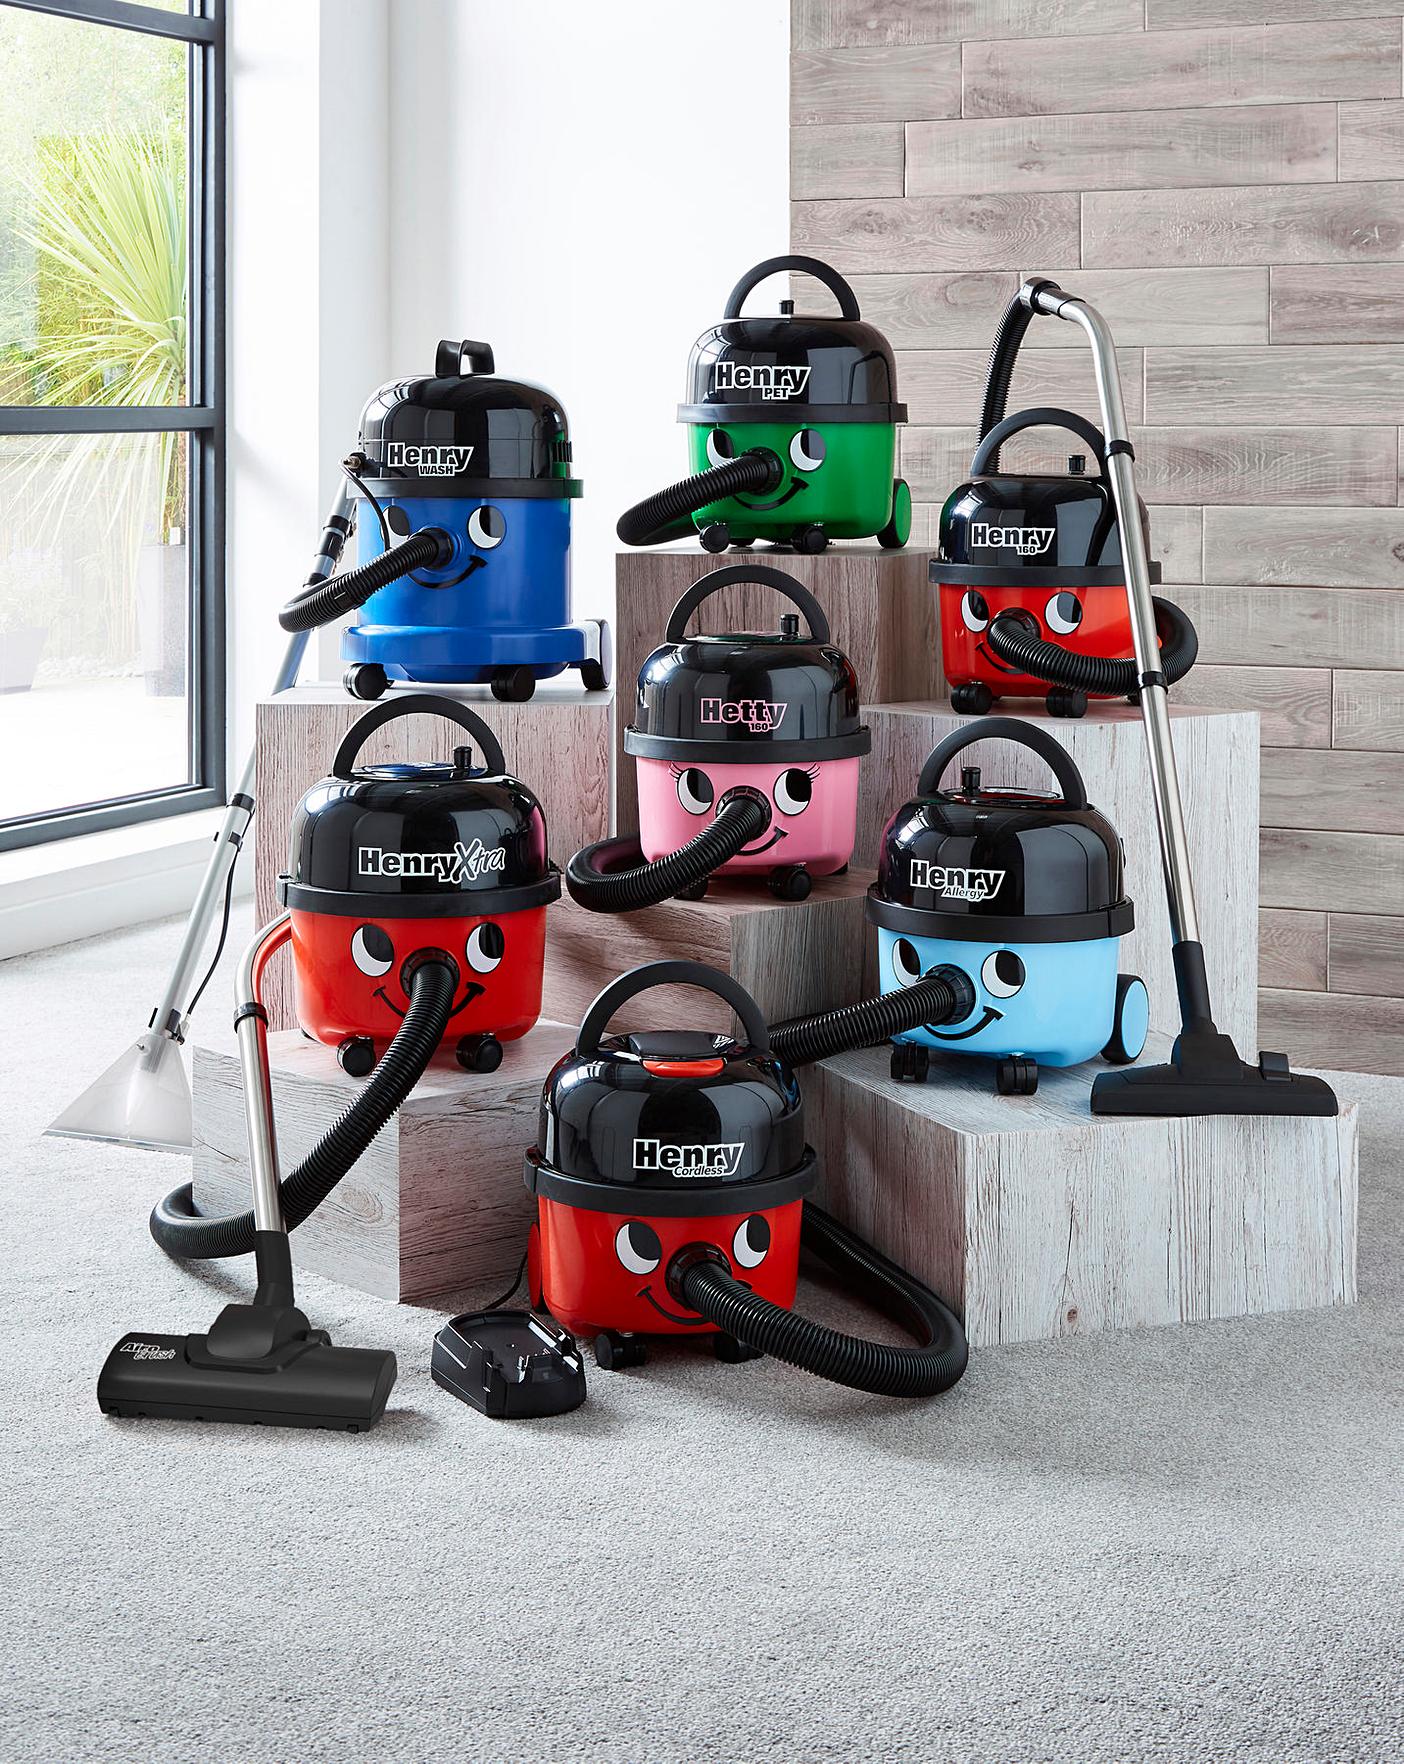 Attachments For Henry Hoover Cheap Collection, Save 59% | jlcatj.gob.mx